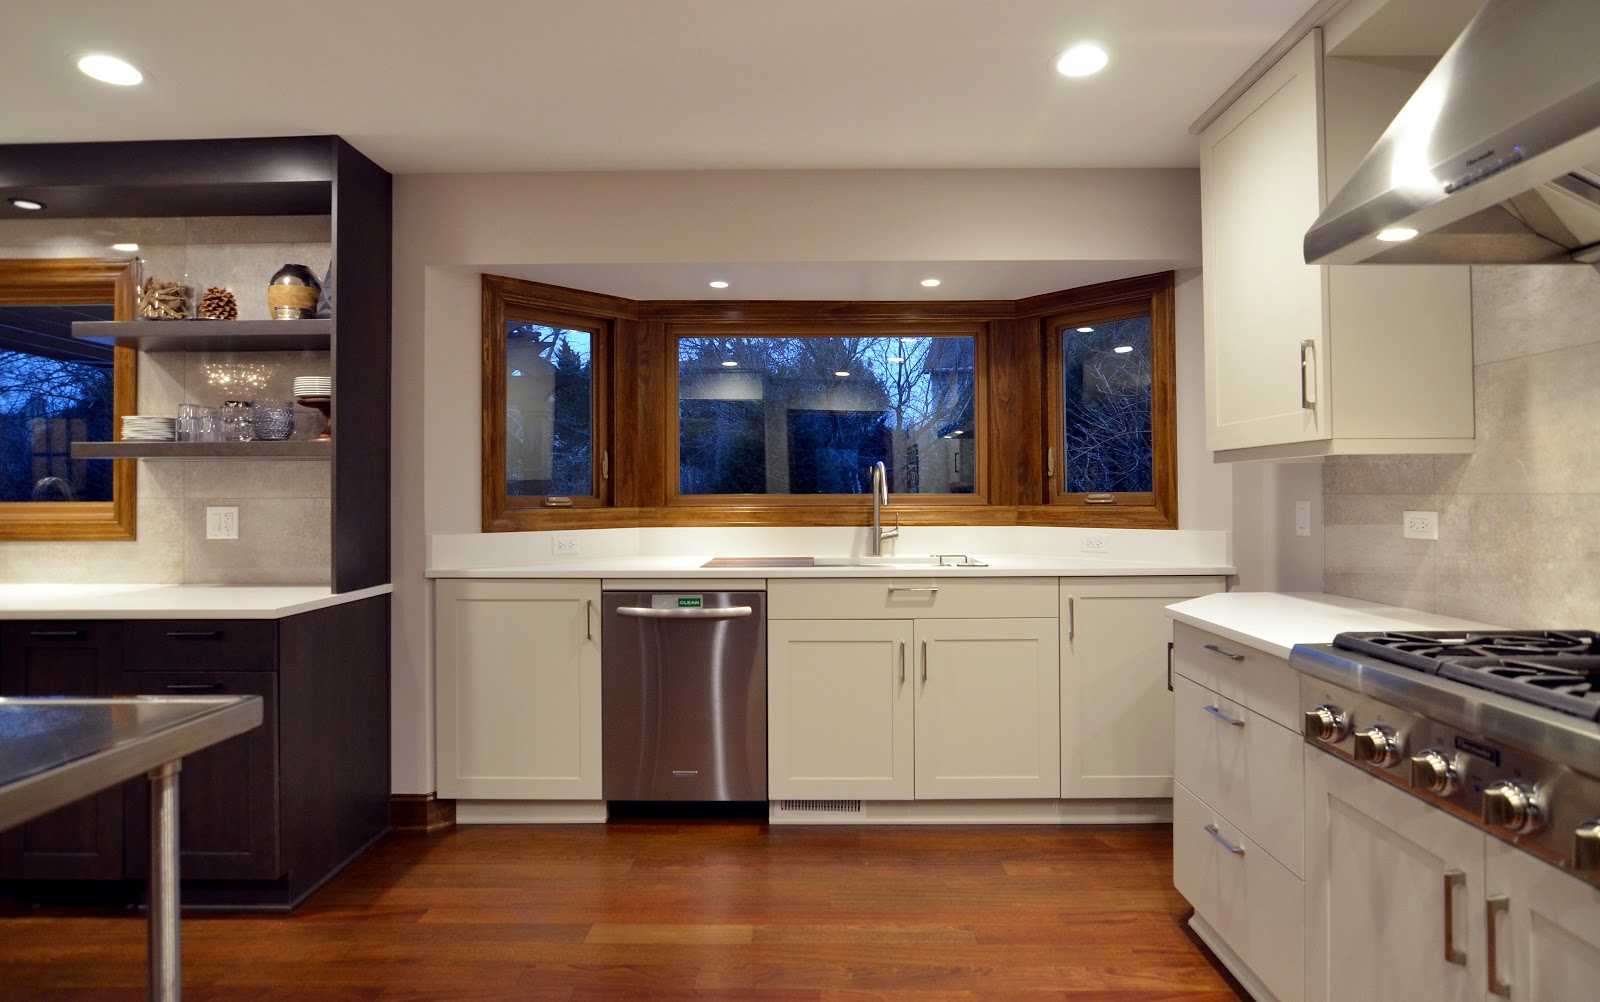 Kitchen with cabinets, sink, appliances, and windows